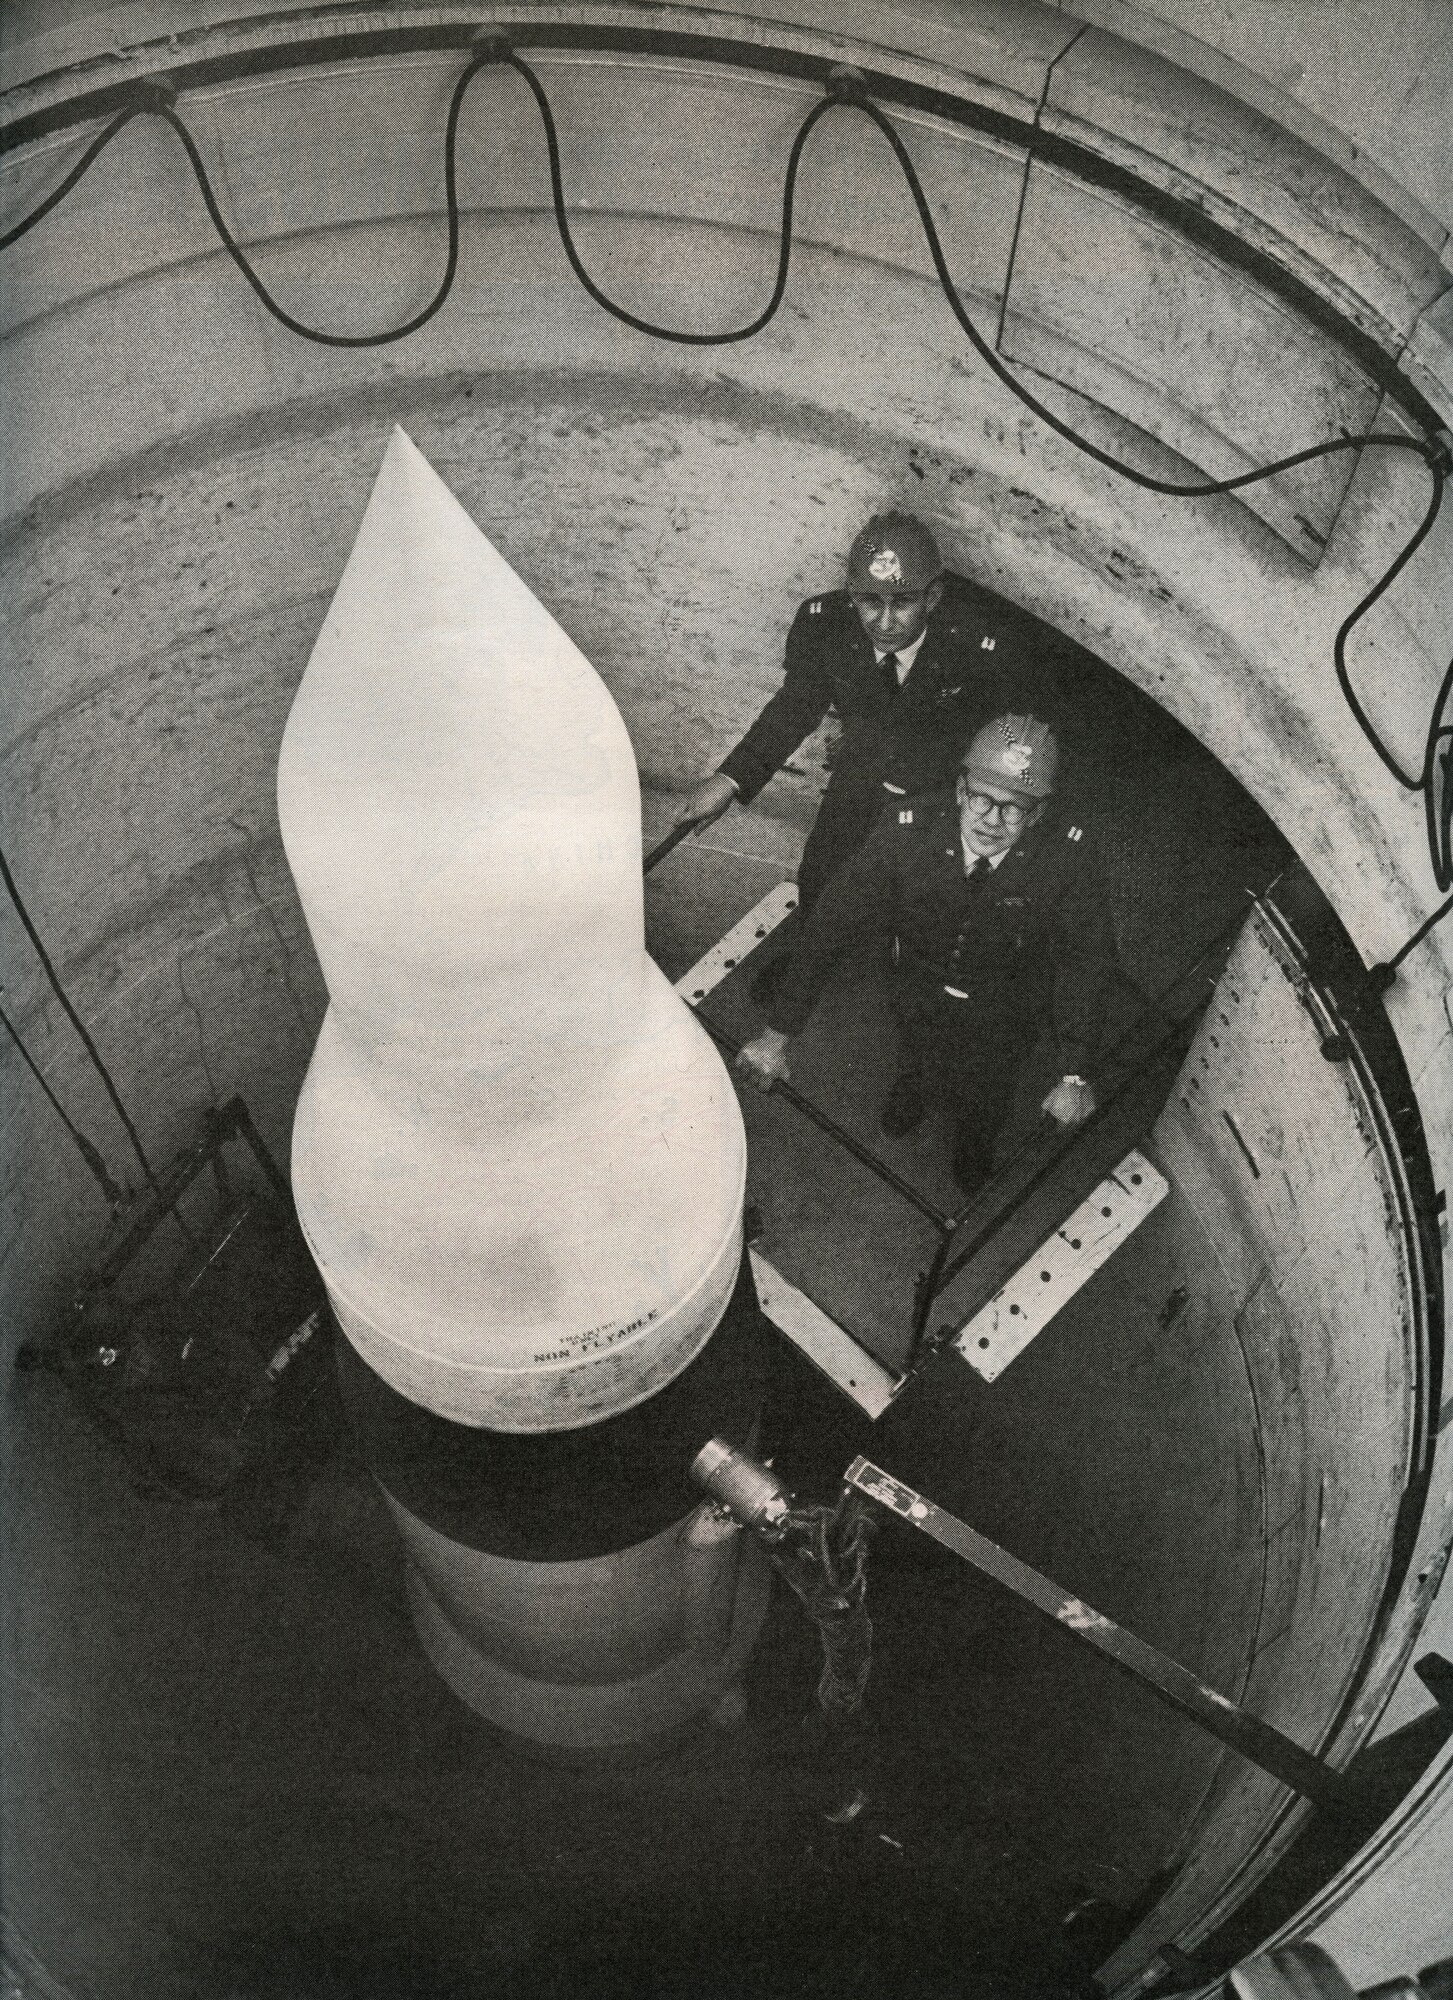 MISSILE COMPLEX, S.D. -- Captains Allen Lamb and Bill Christians, missile combat crew commanders, stand on a platform at a missile silo, November 1964. This year marks the 50th Anniversary of the installation of the first Minuteman Intercontinental Ballistic Missile. As these photos show, the mission has existed for decades and will continue to provide safe, secure and effective strategic deterrence for years to come. (LIFE photo/Bill Ray)